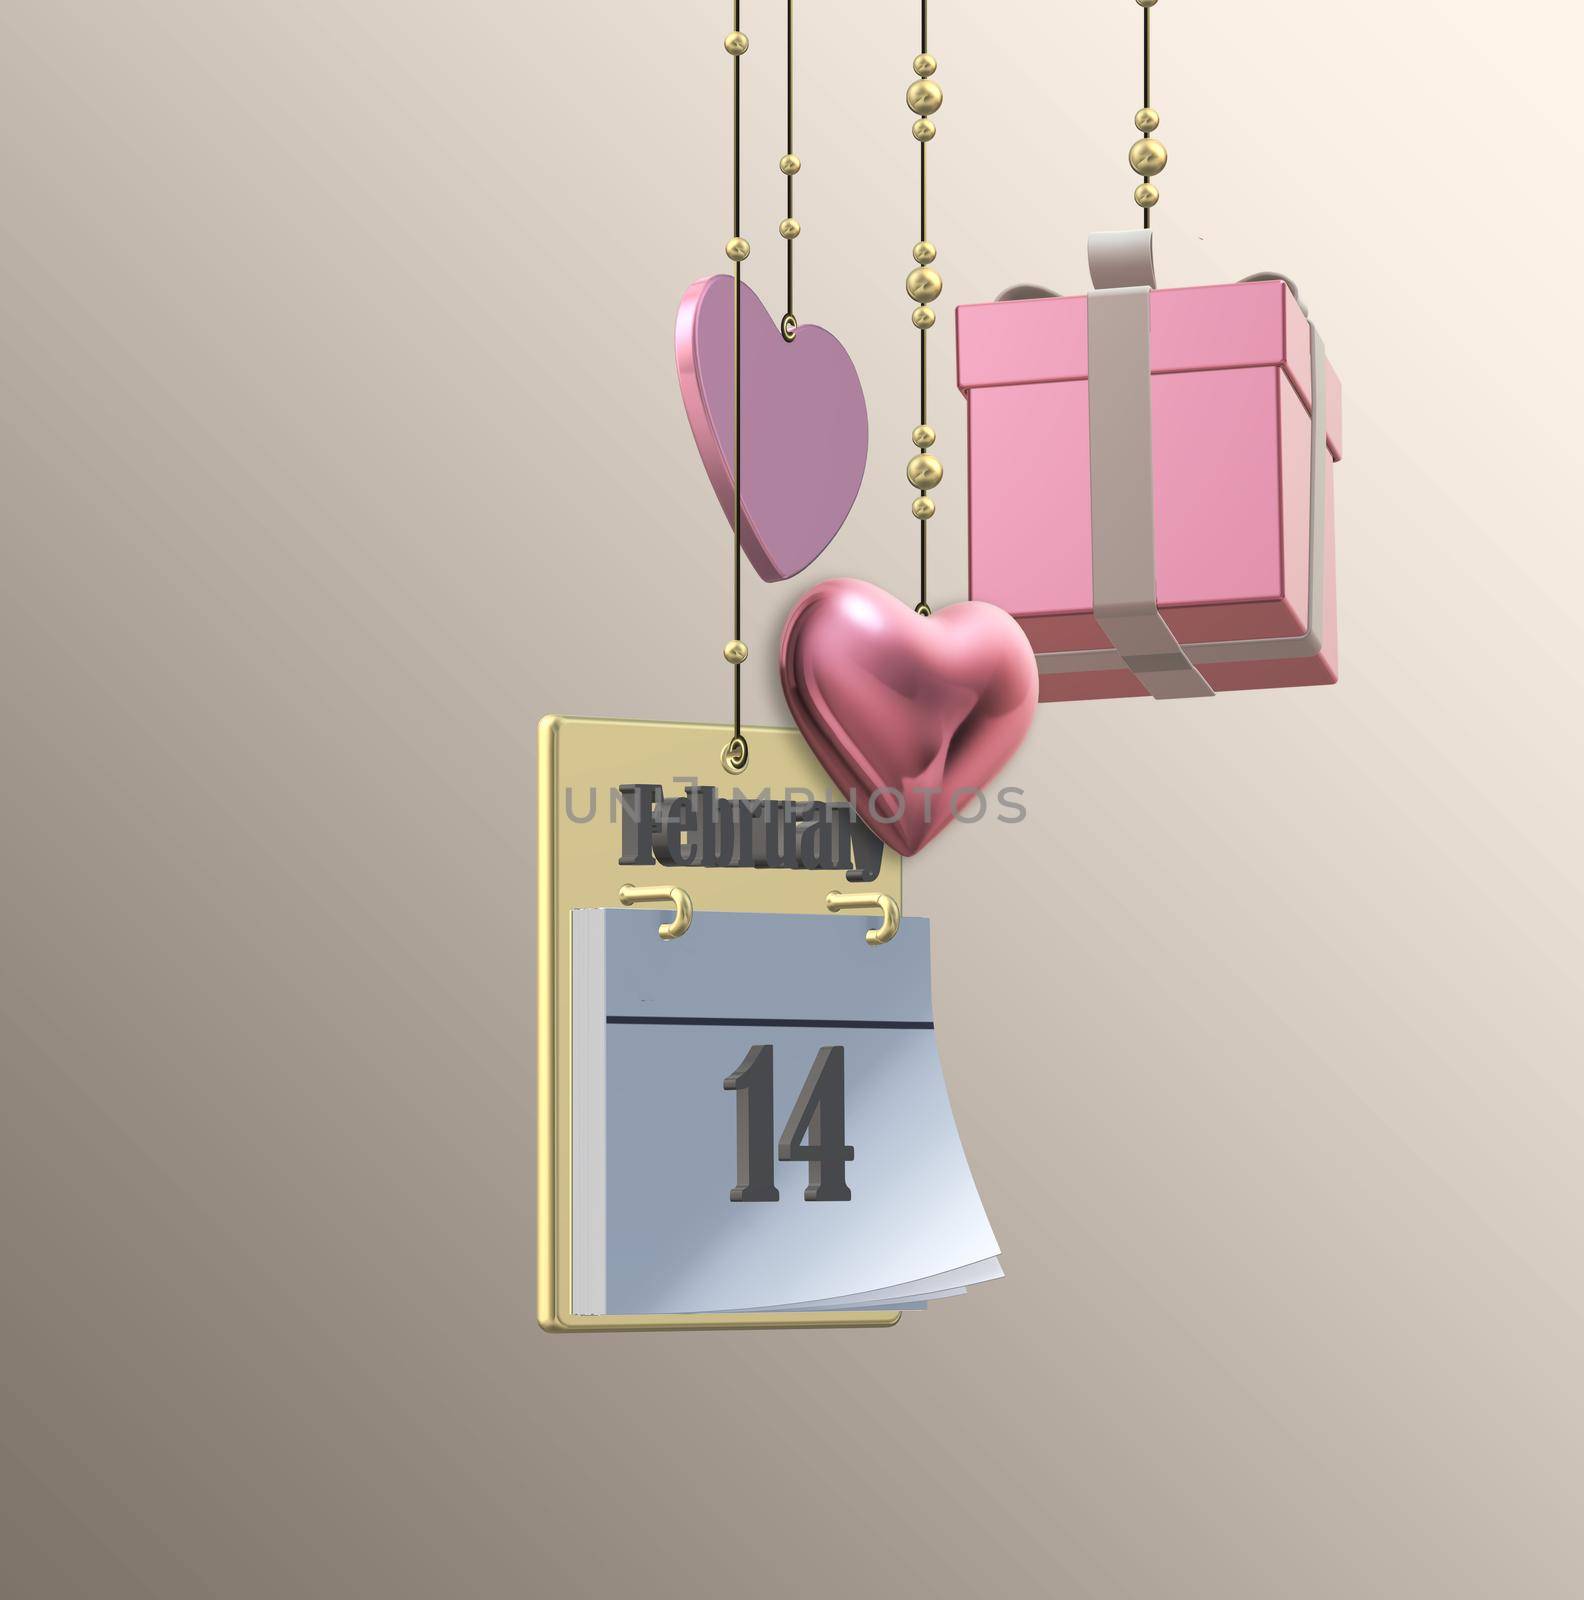 Valentine love card with hanging 3D hearts, gift box, calendar, 14th February on pastel pink background. Love, happy Valentines day design. 3D illustration